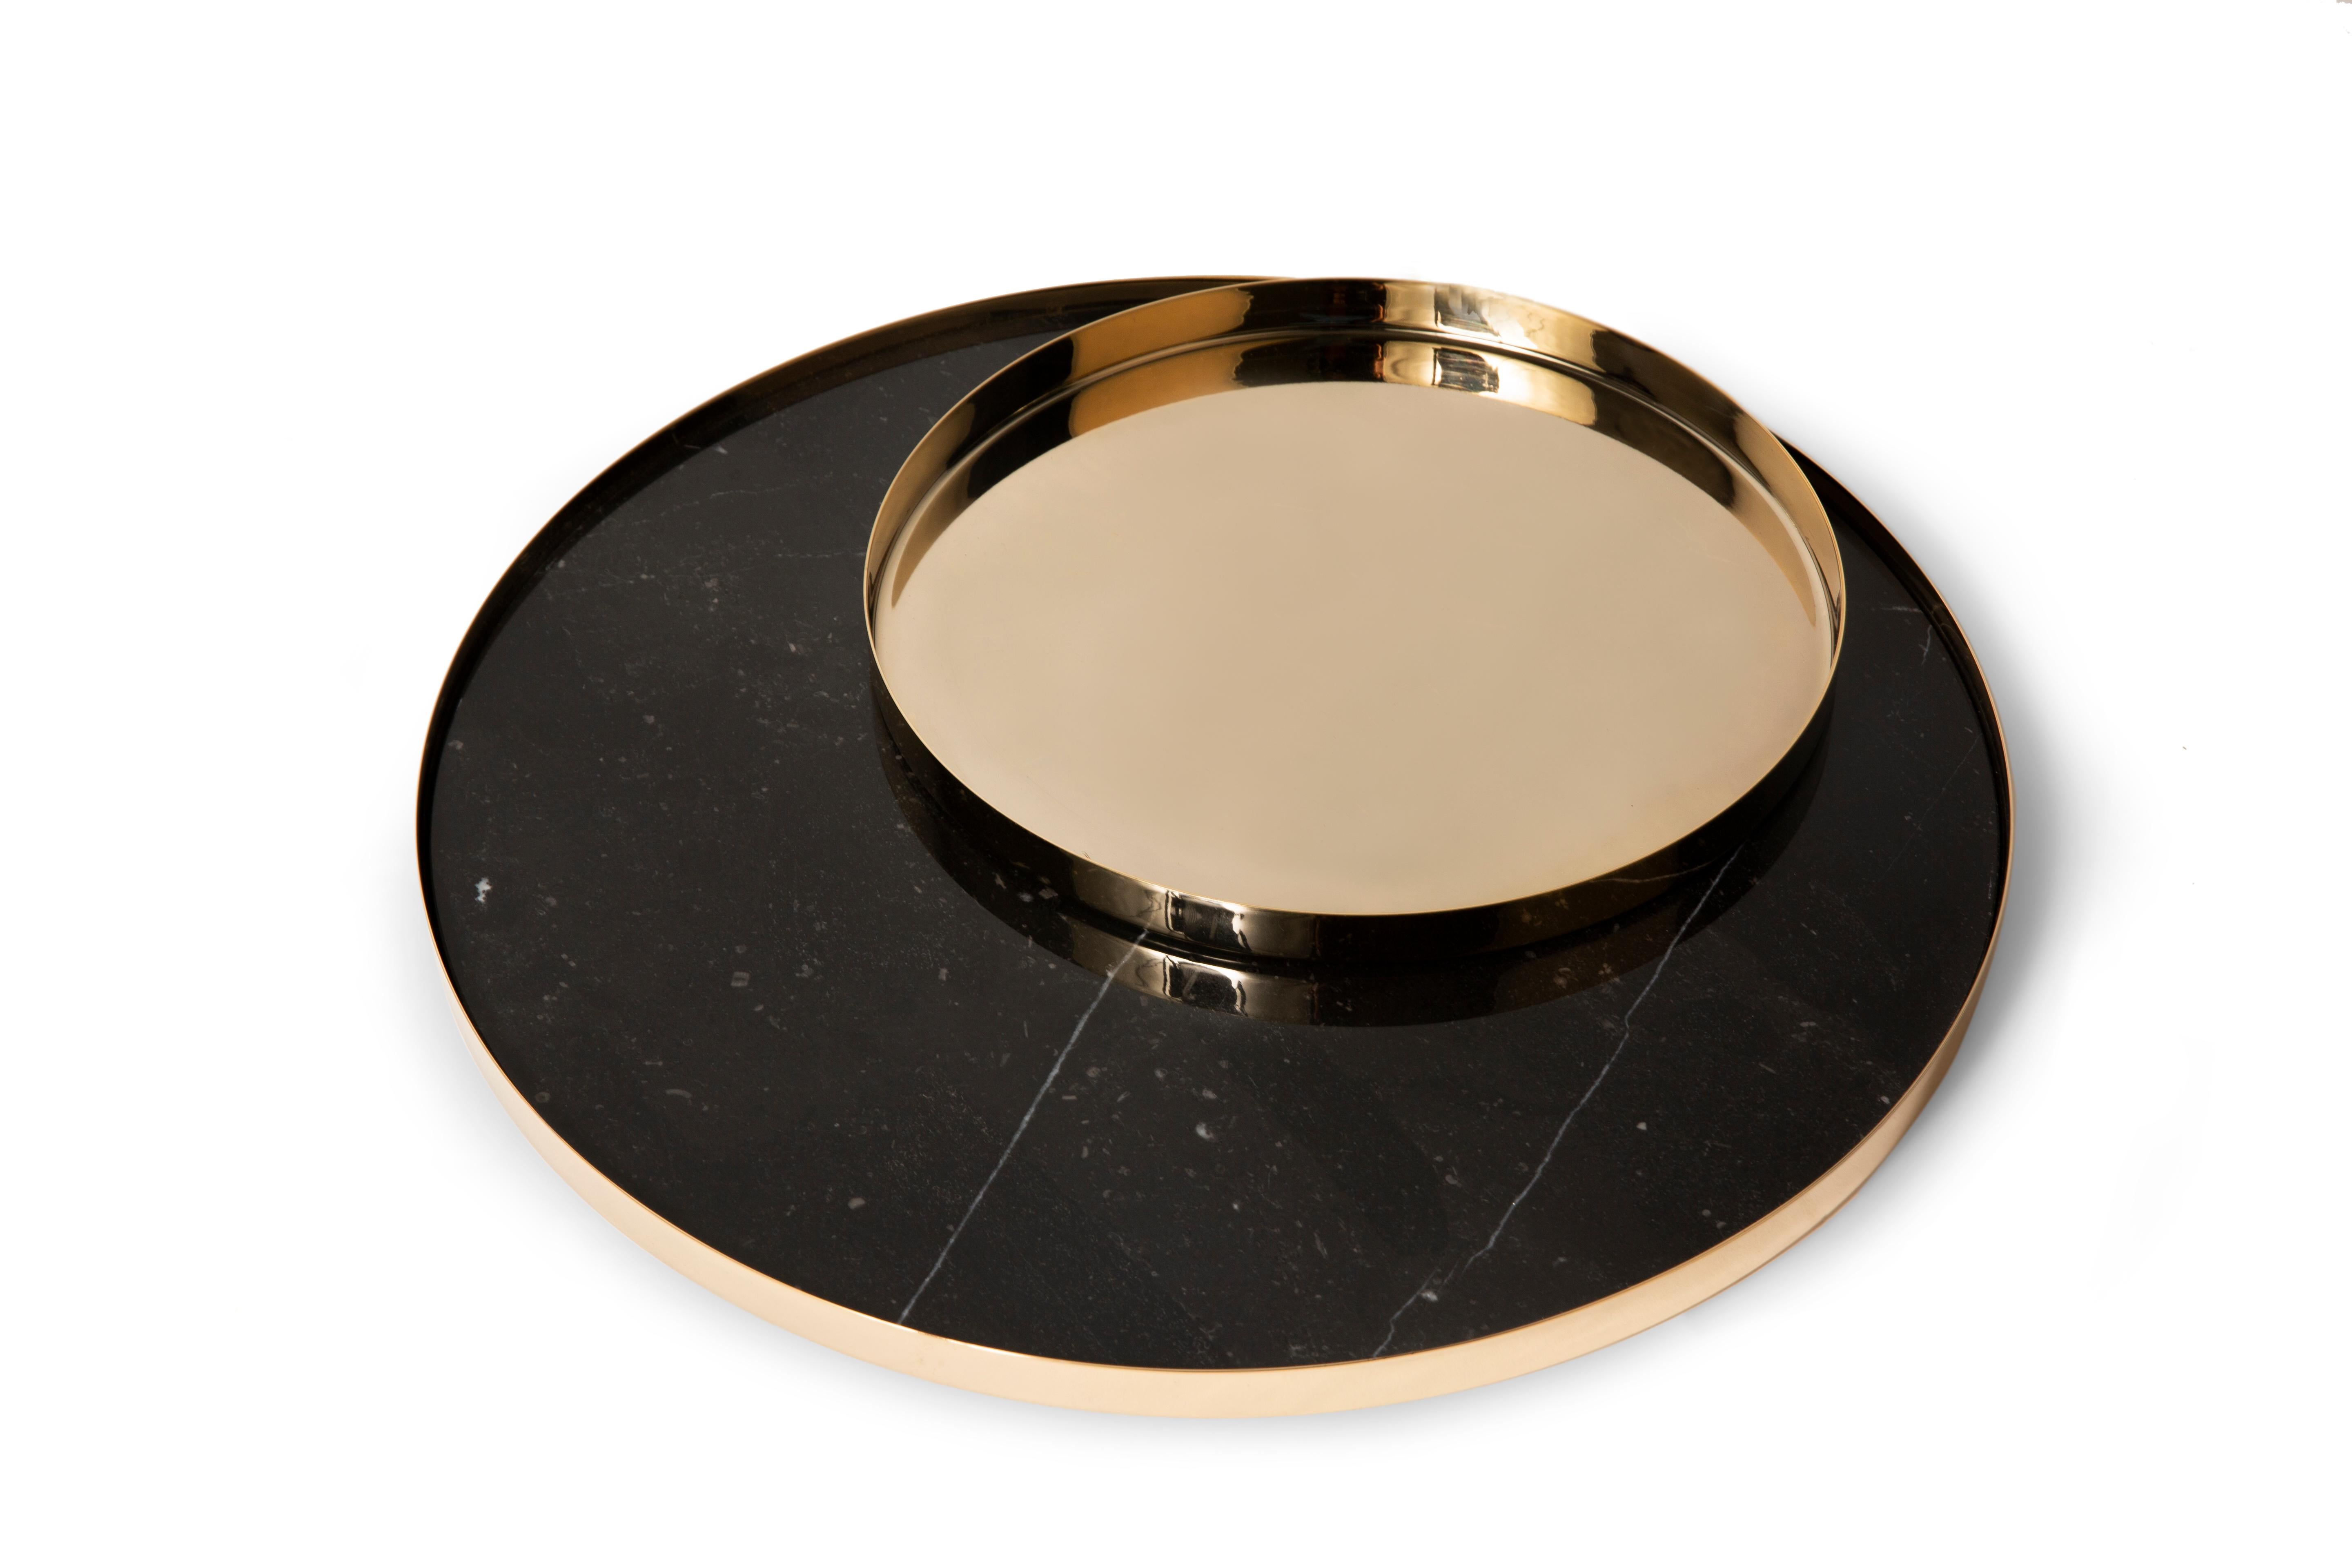 Made from high-quality stainless steel, this tray is not only durable but also stunningly beautiful. Its unique plated design is inspired by the captivating allure of the moon, making it a standout piece that will draw attention from all who see